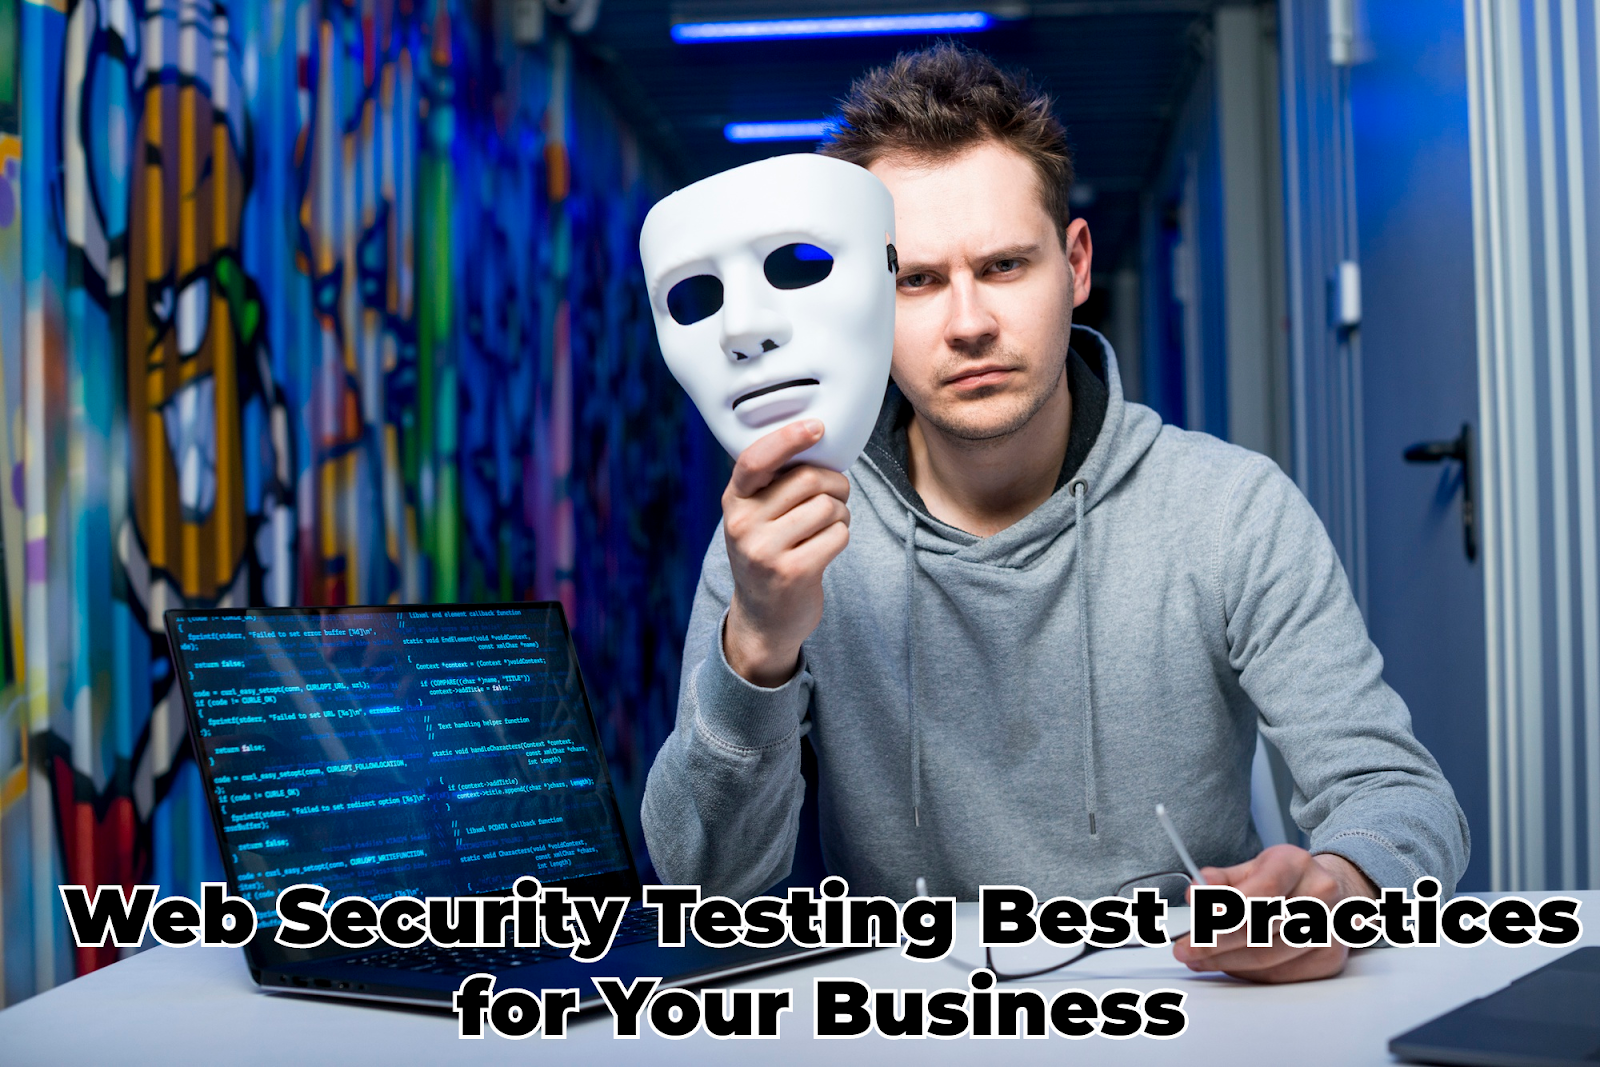 Top Web Security Testing Best Practices for Your Business